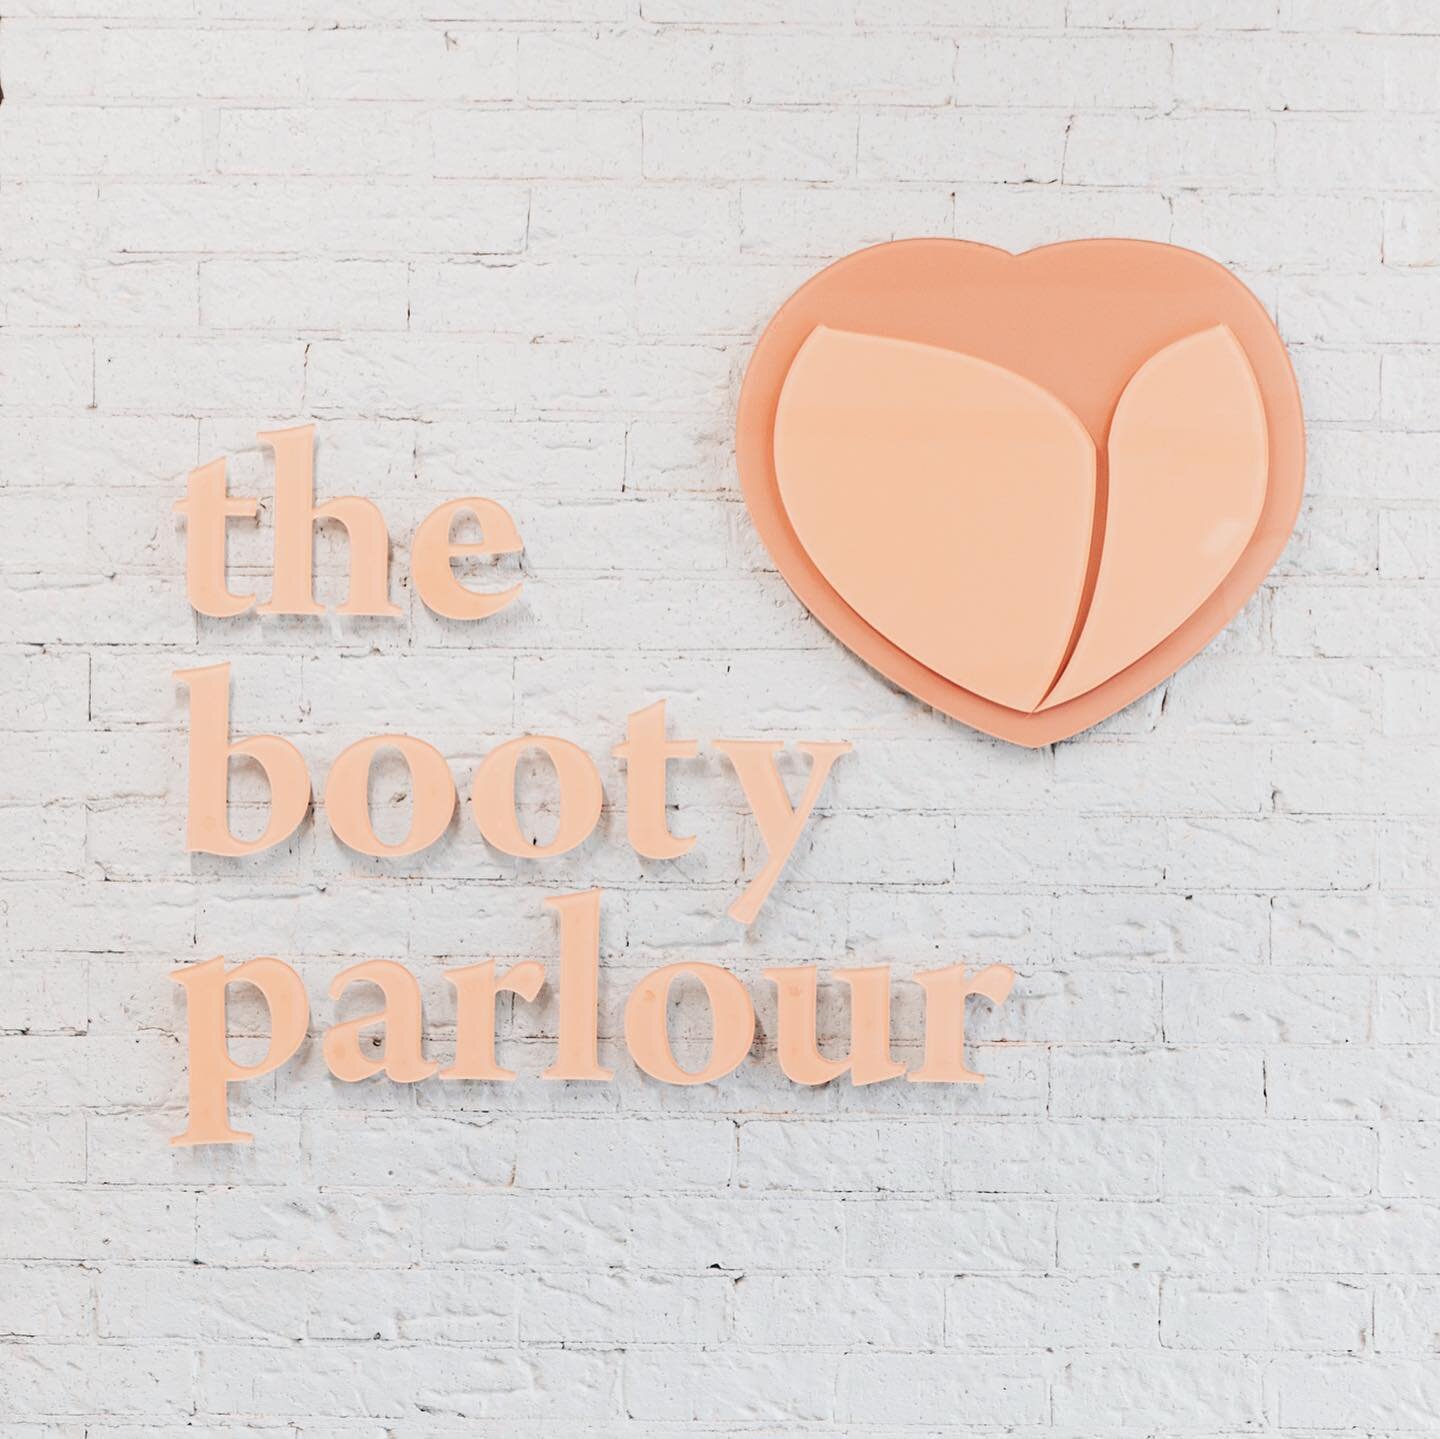 What is &ldquo;the Booty Parlour?&rdquo;
⠀⠀⠀⠀⠀⠀⠀⠀⠀
The Booty Parlour is our peachy boutique women&rsquo;s strength studio in Newport, on Sydney&rsquo;s northern beaches.
⠀⠀⠀⠀⠀⠀⠀⠀⠀
The name &ldquo;the booty parlour,&rdquo; was a bit of a tongue in che